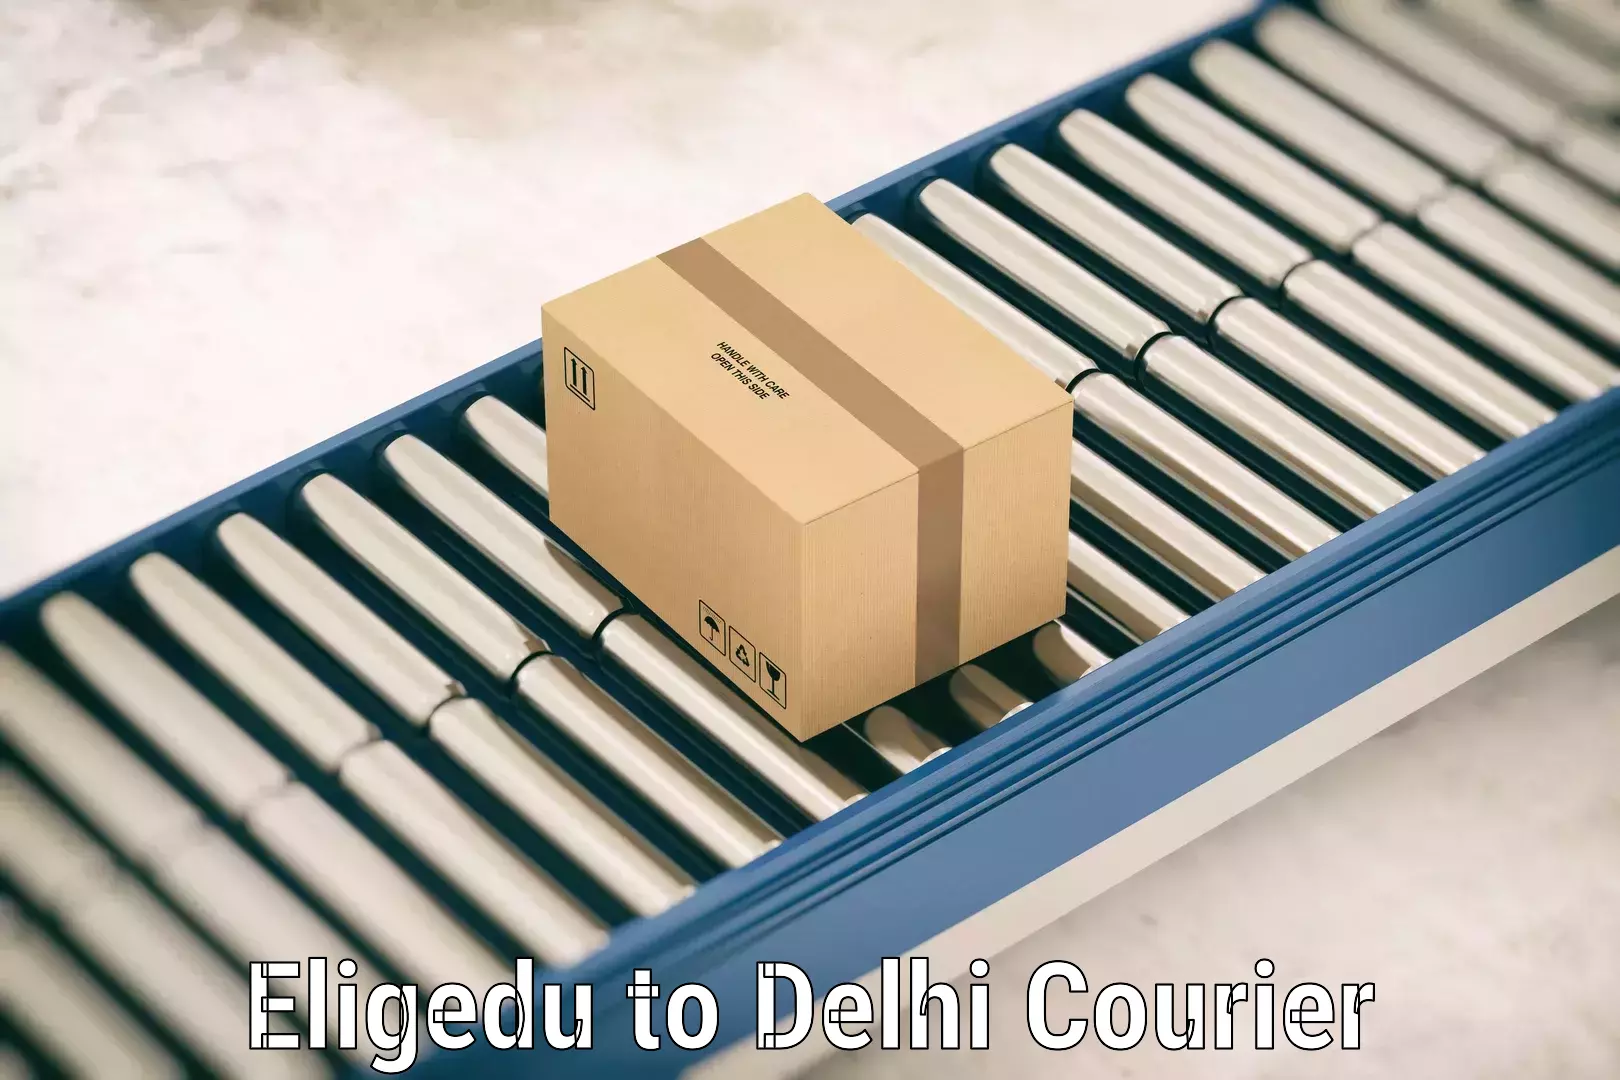 Luggage transport consultancy Eligedu to Lodhi Road